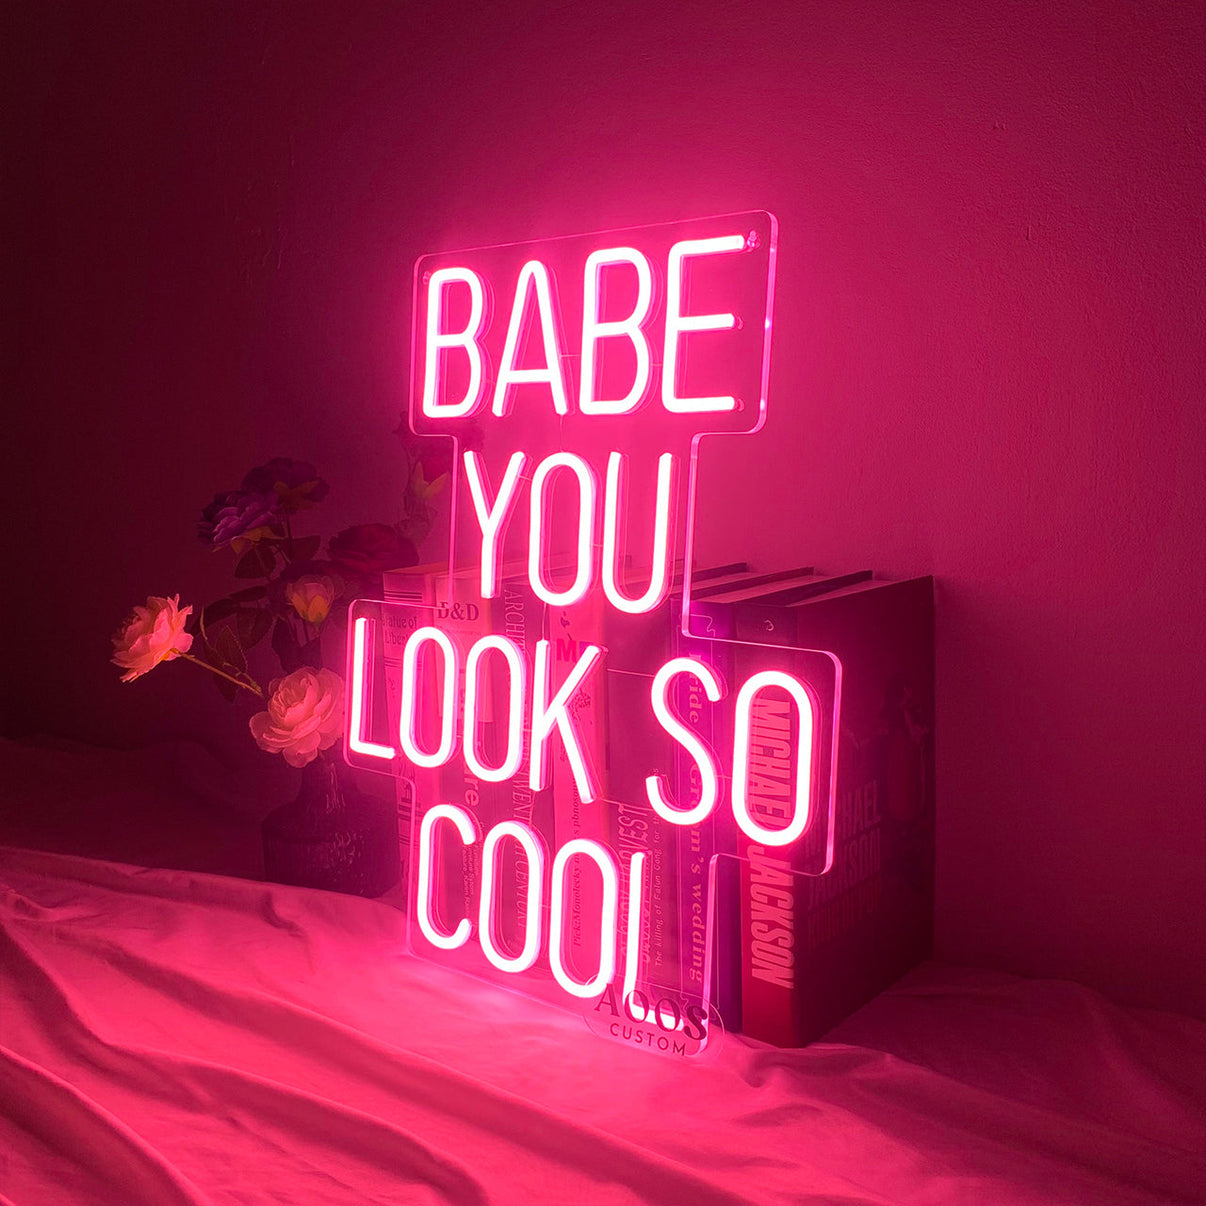 Custom Made Neon Signs, Babe You Look So Cool Neon Sign, LED Business ...